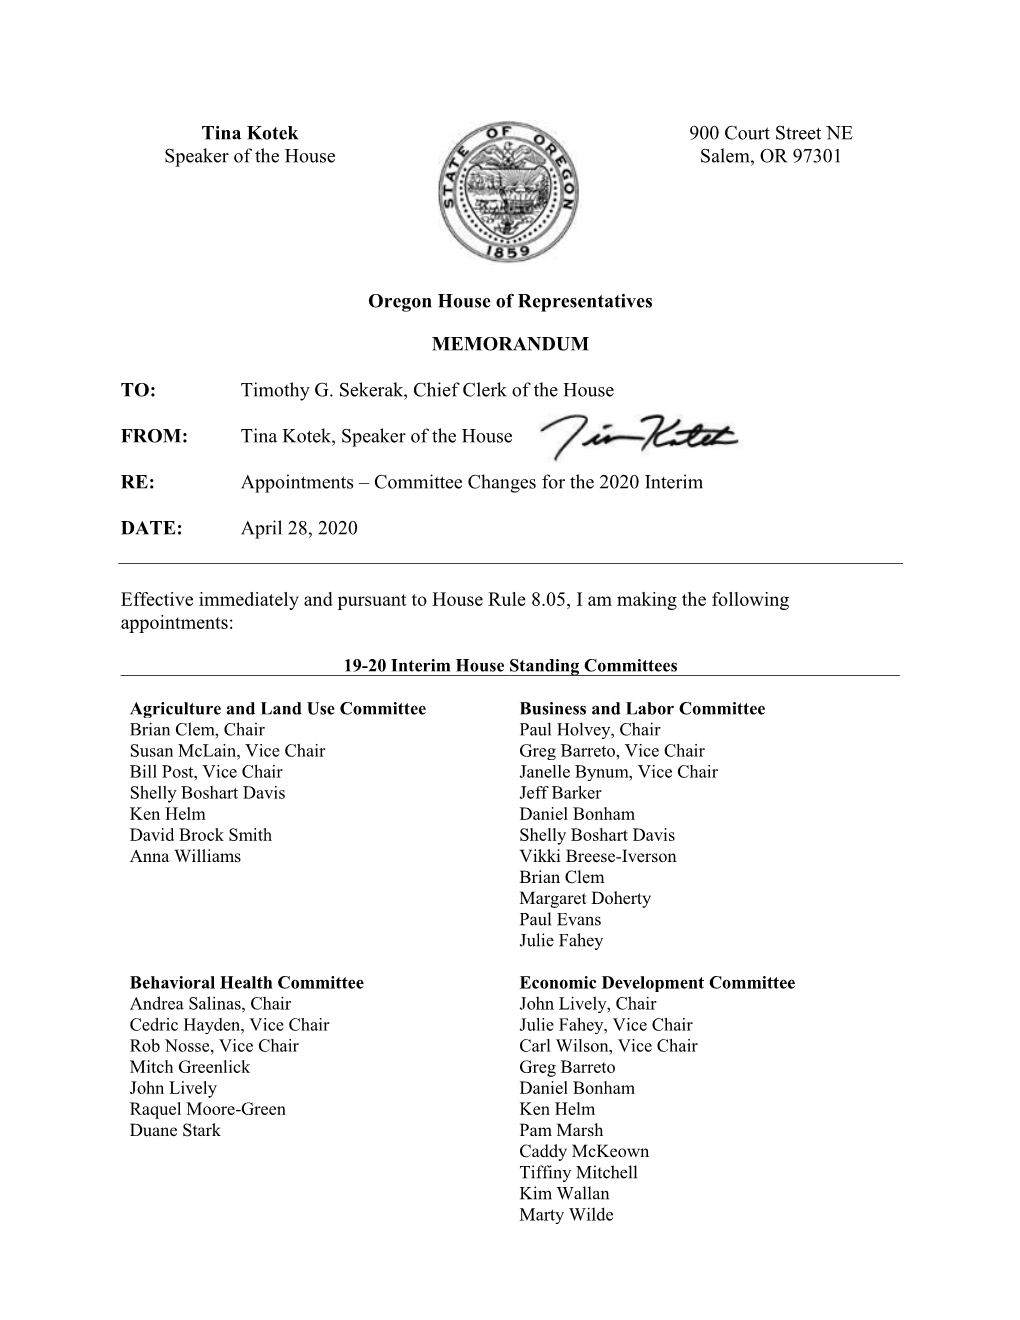 Speaker Appointments – Committee Changes for the 2020 Interim